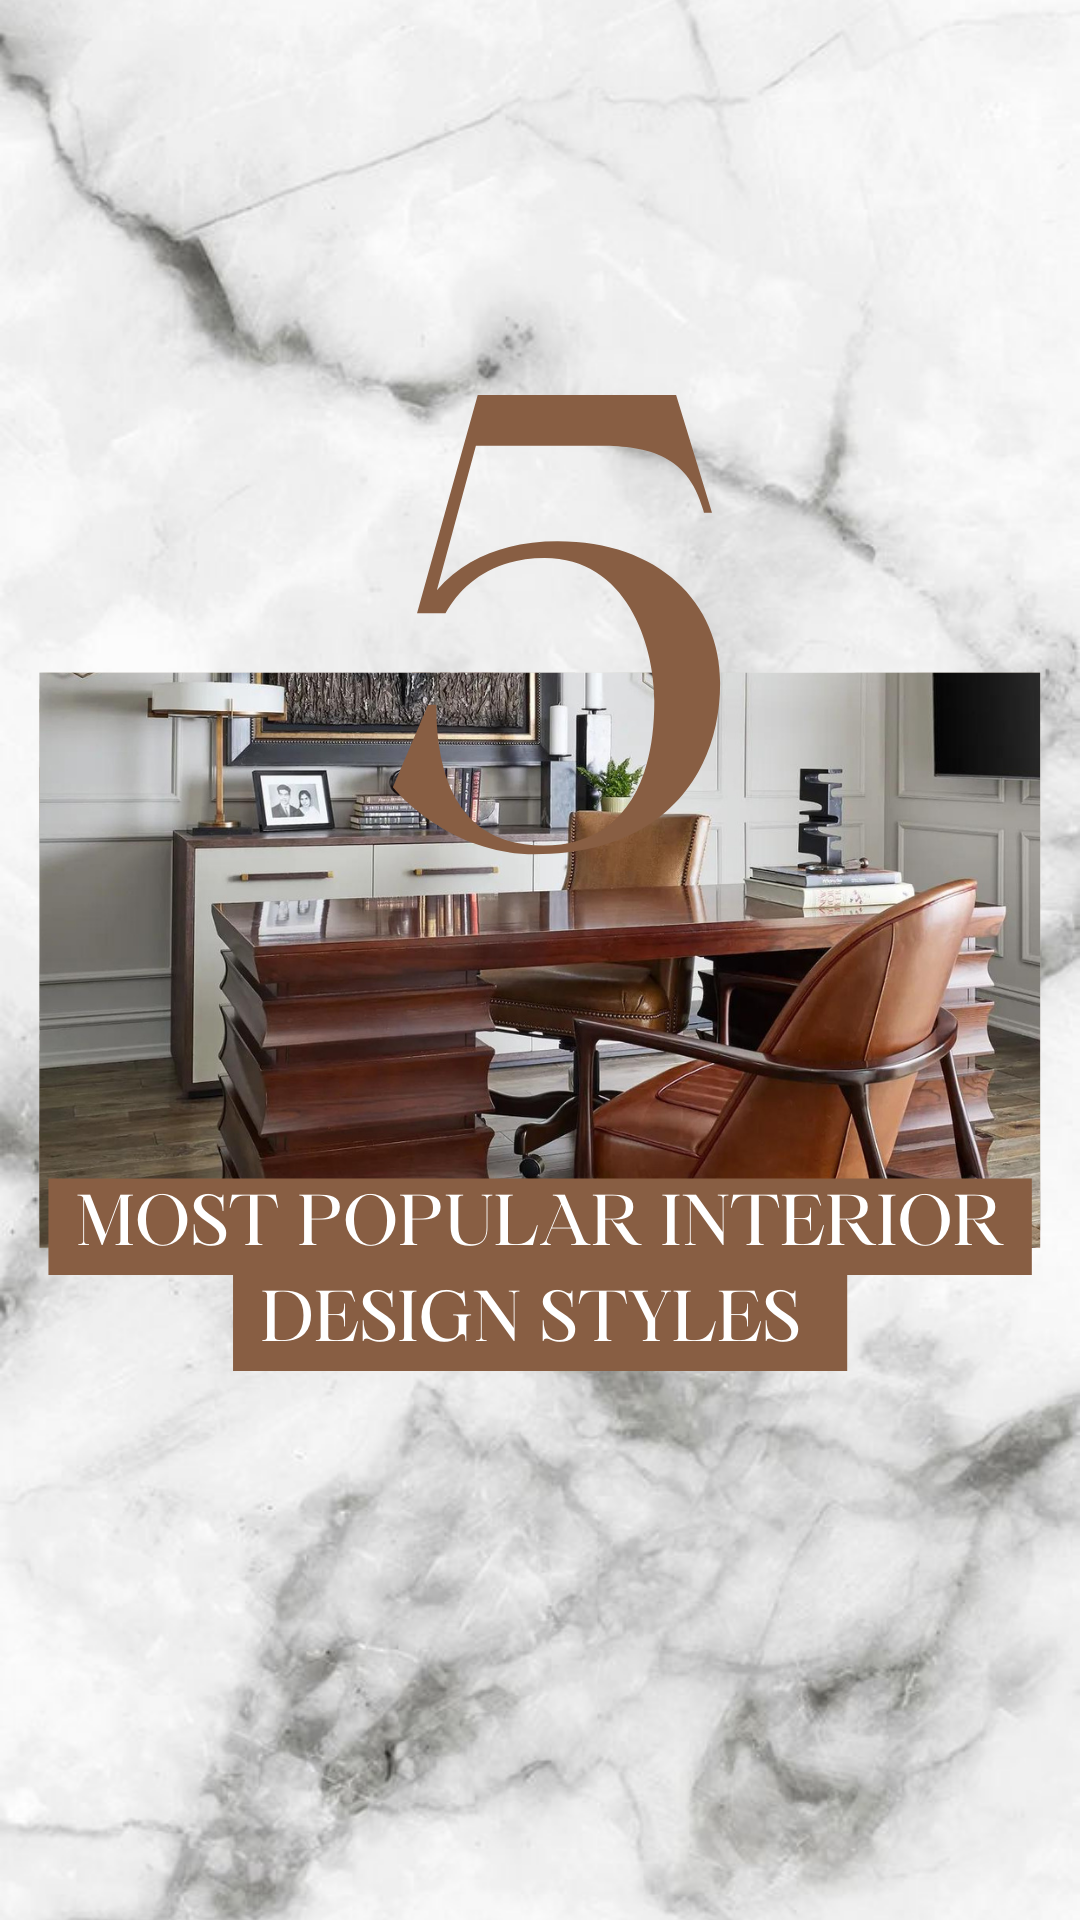 5 Most Popular Interior Design Styles to Know Now